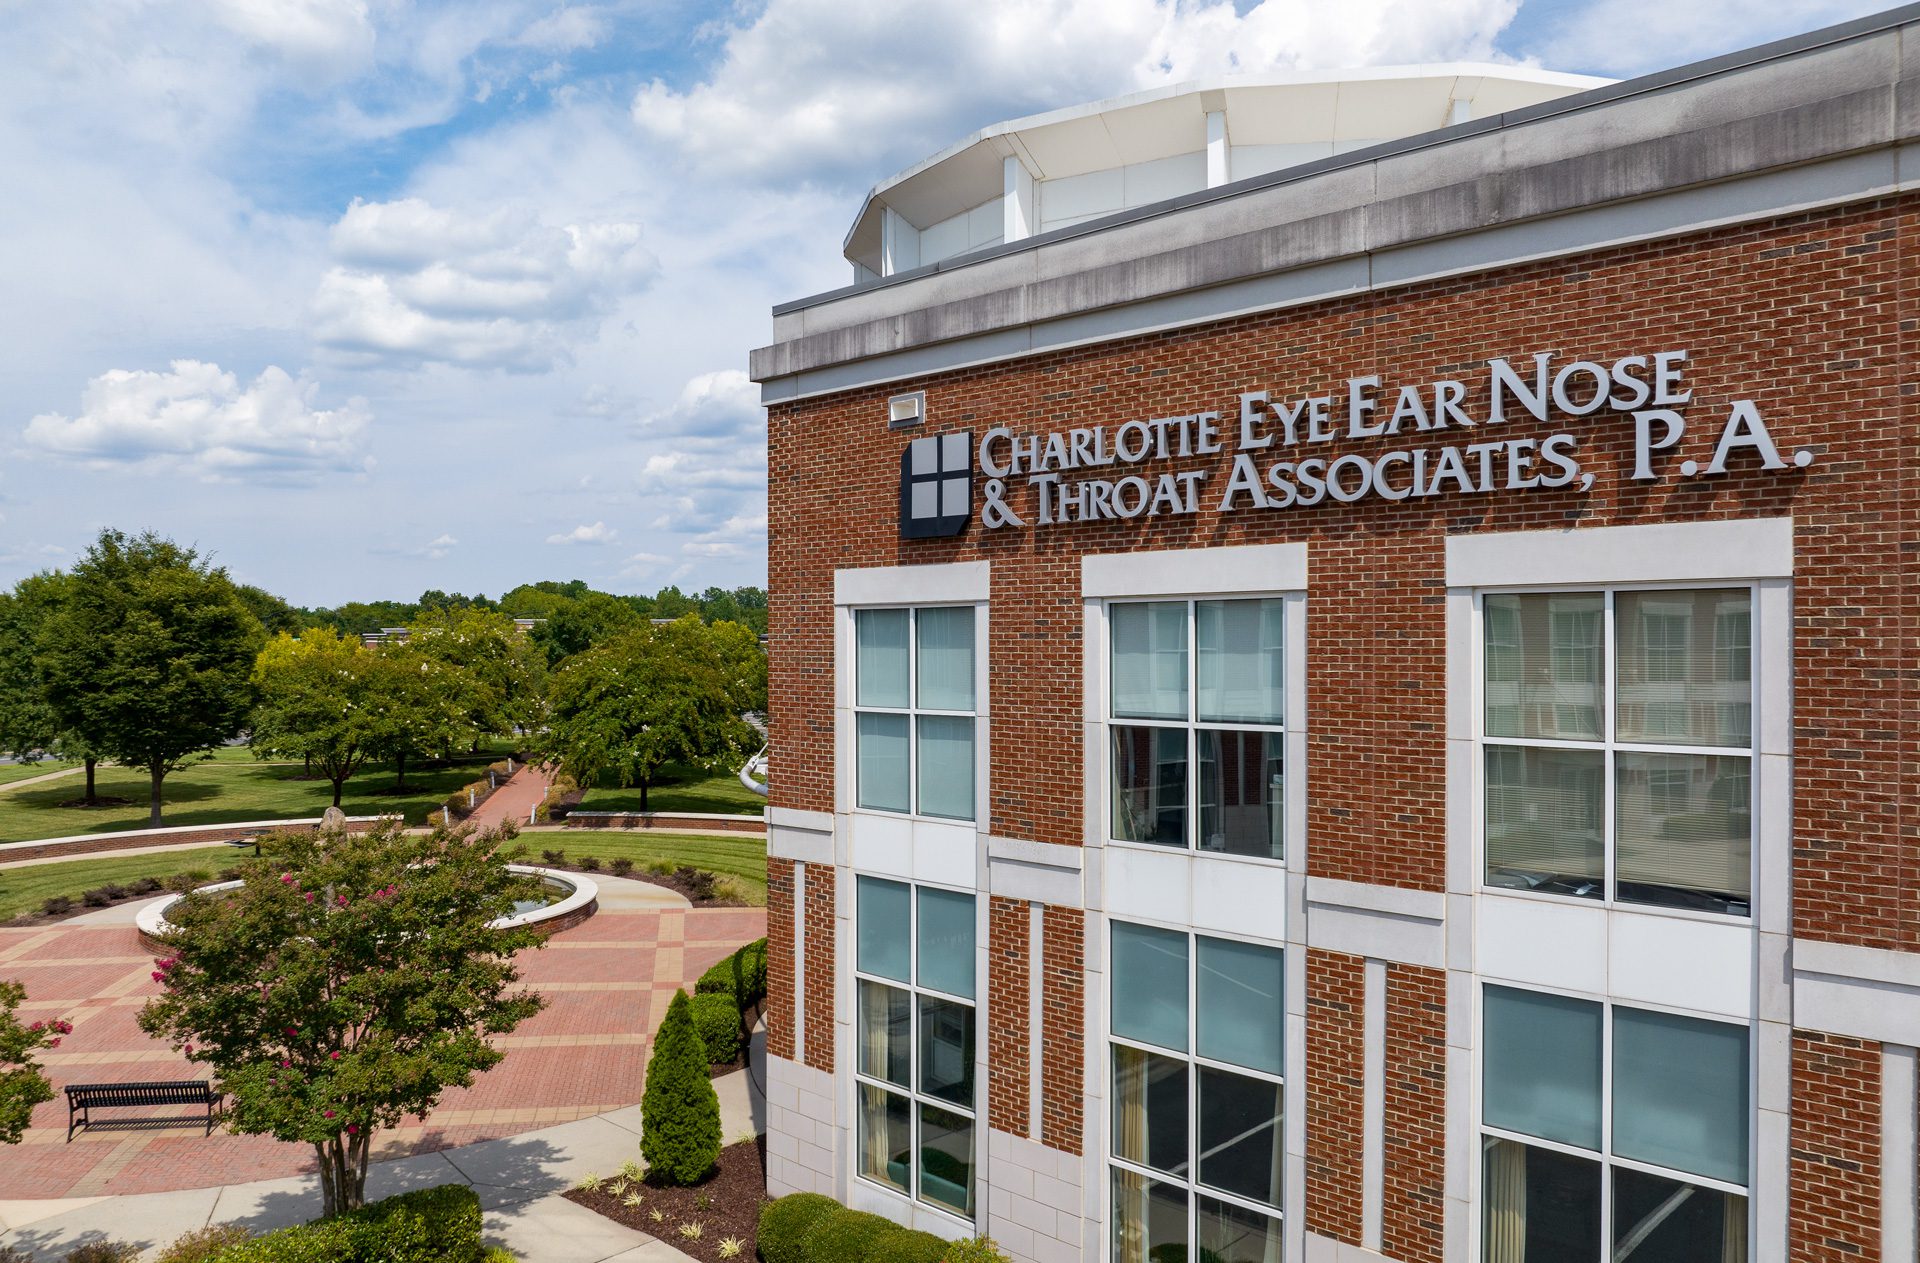 Blakeney Medical building close up with Charlotte Eye Ear Nose and Throat Associates sign on building